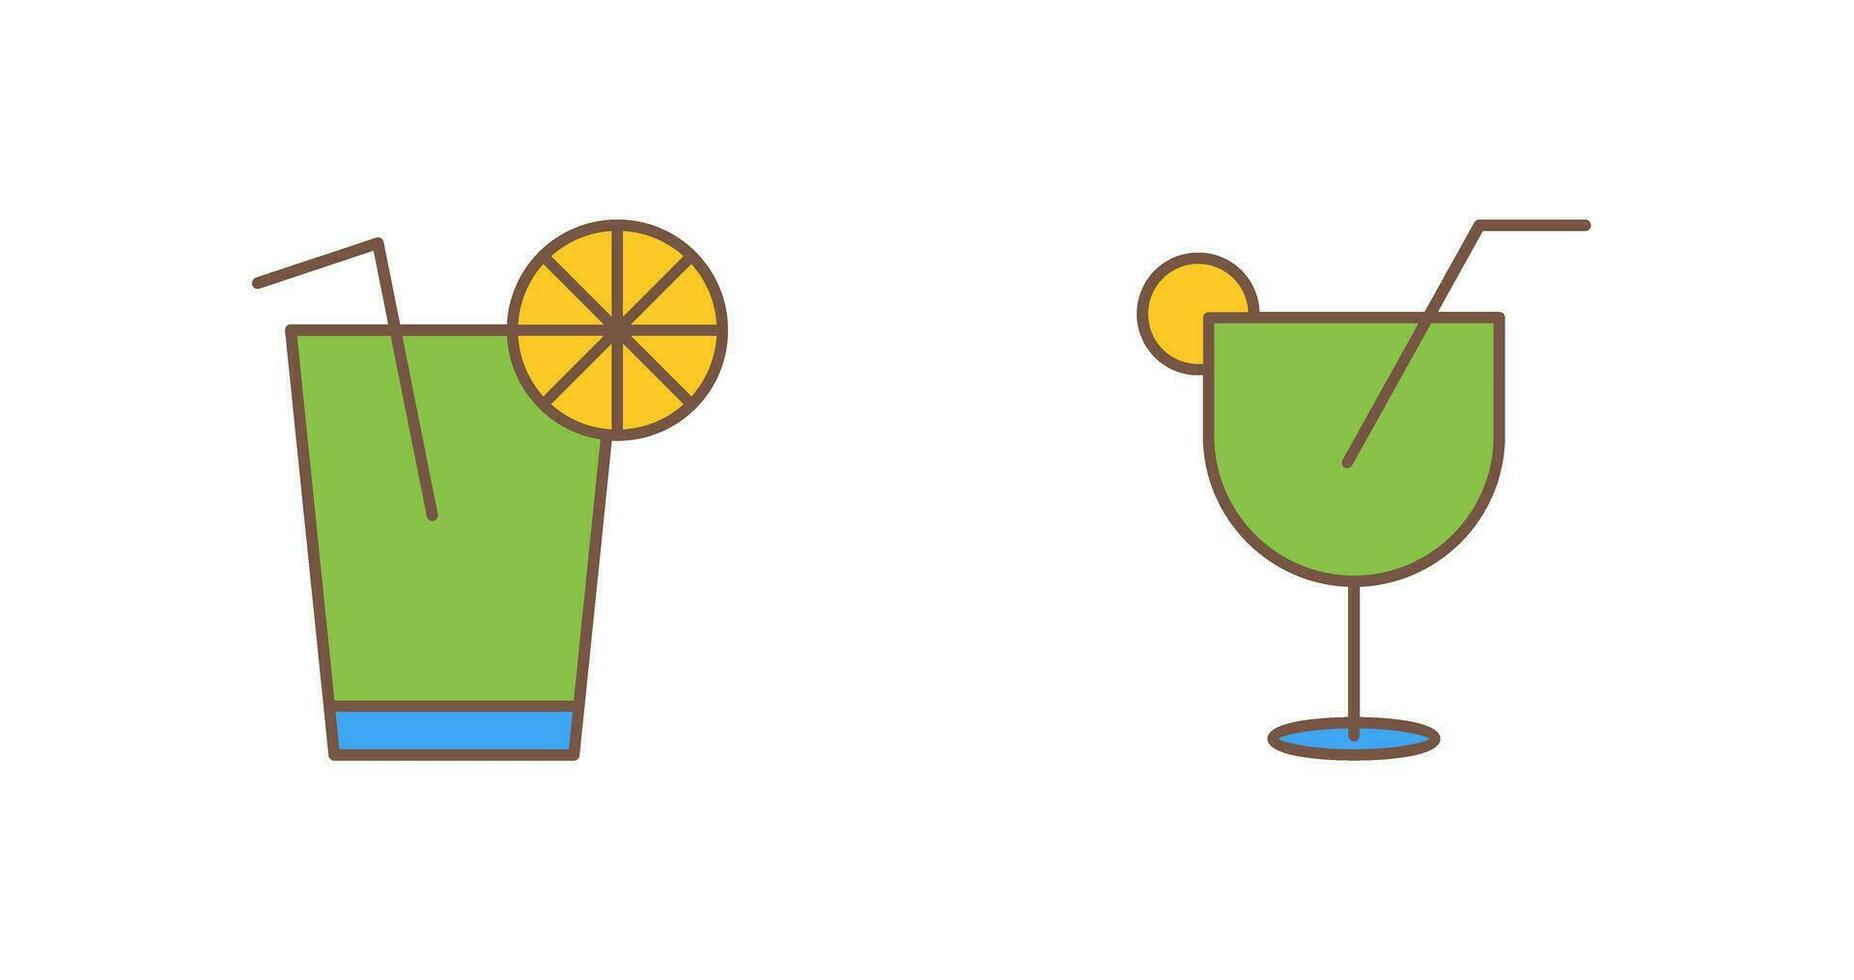 lemon juice and drinks Icon vector